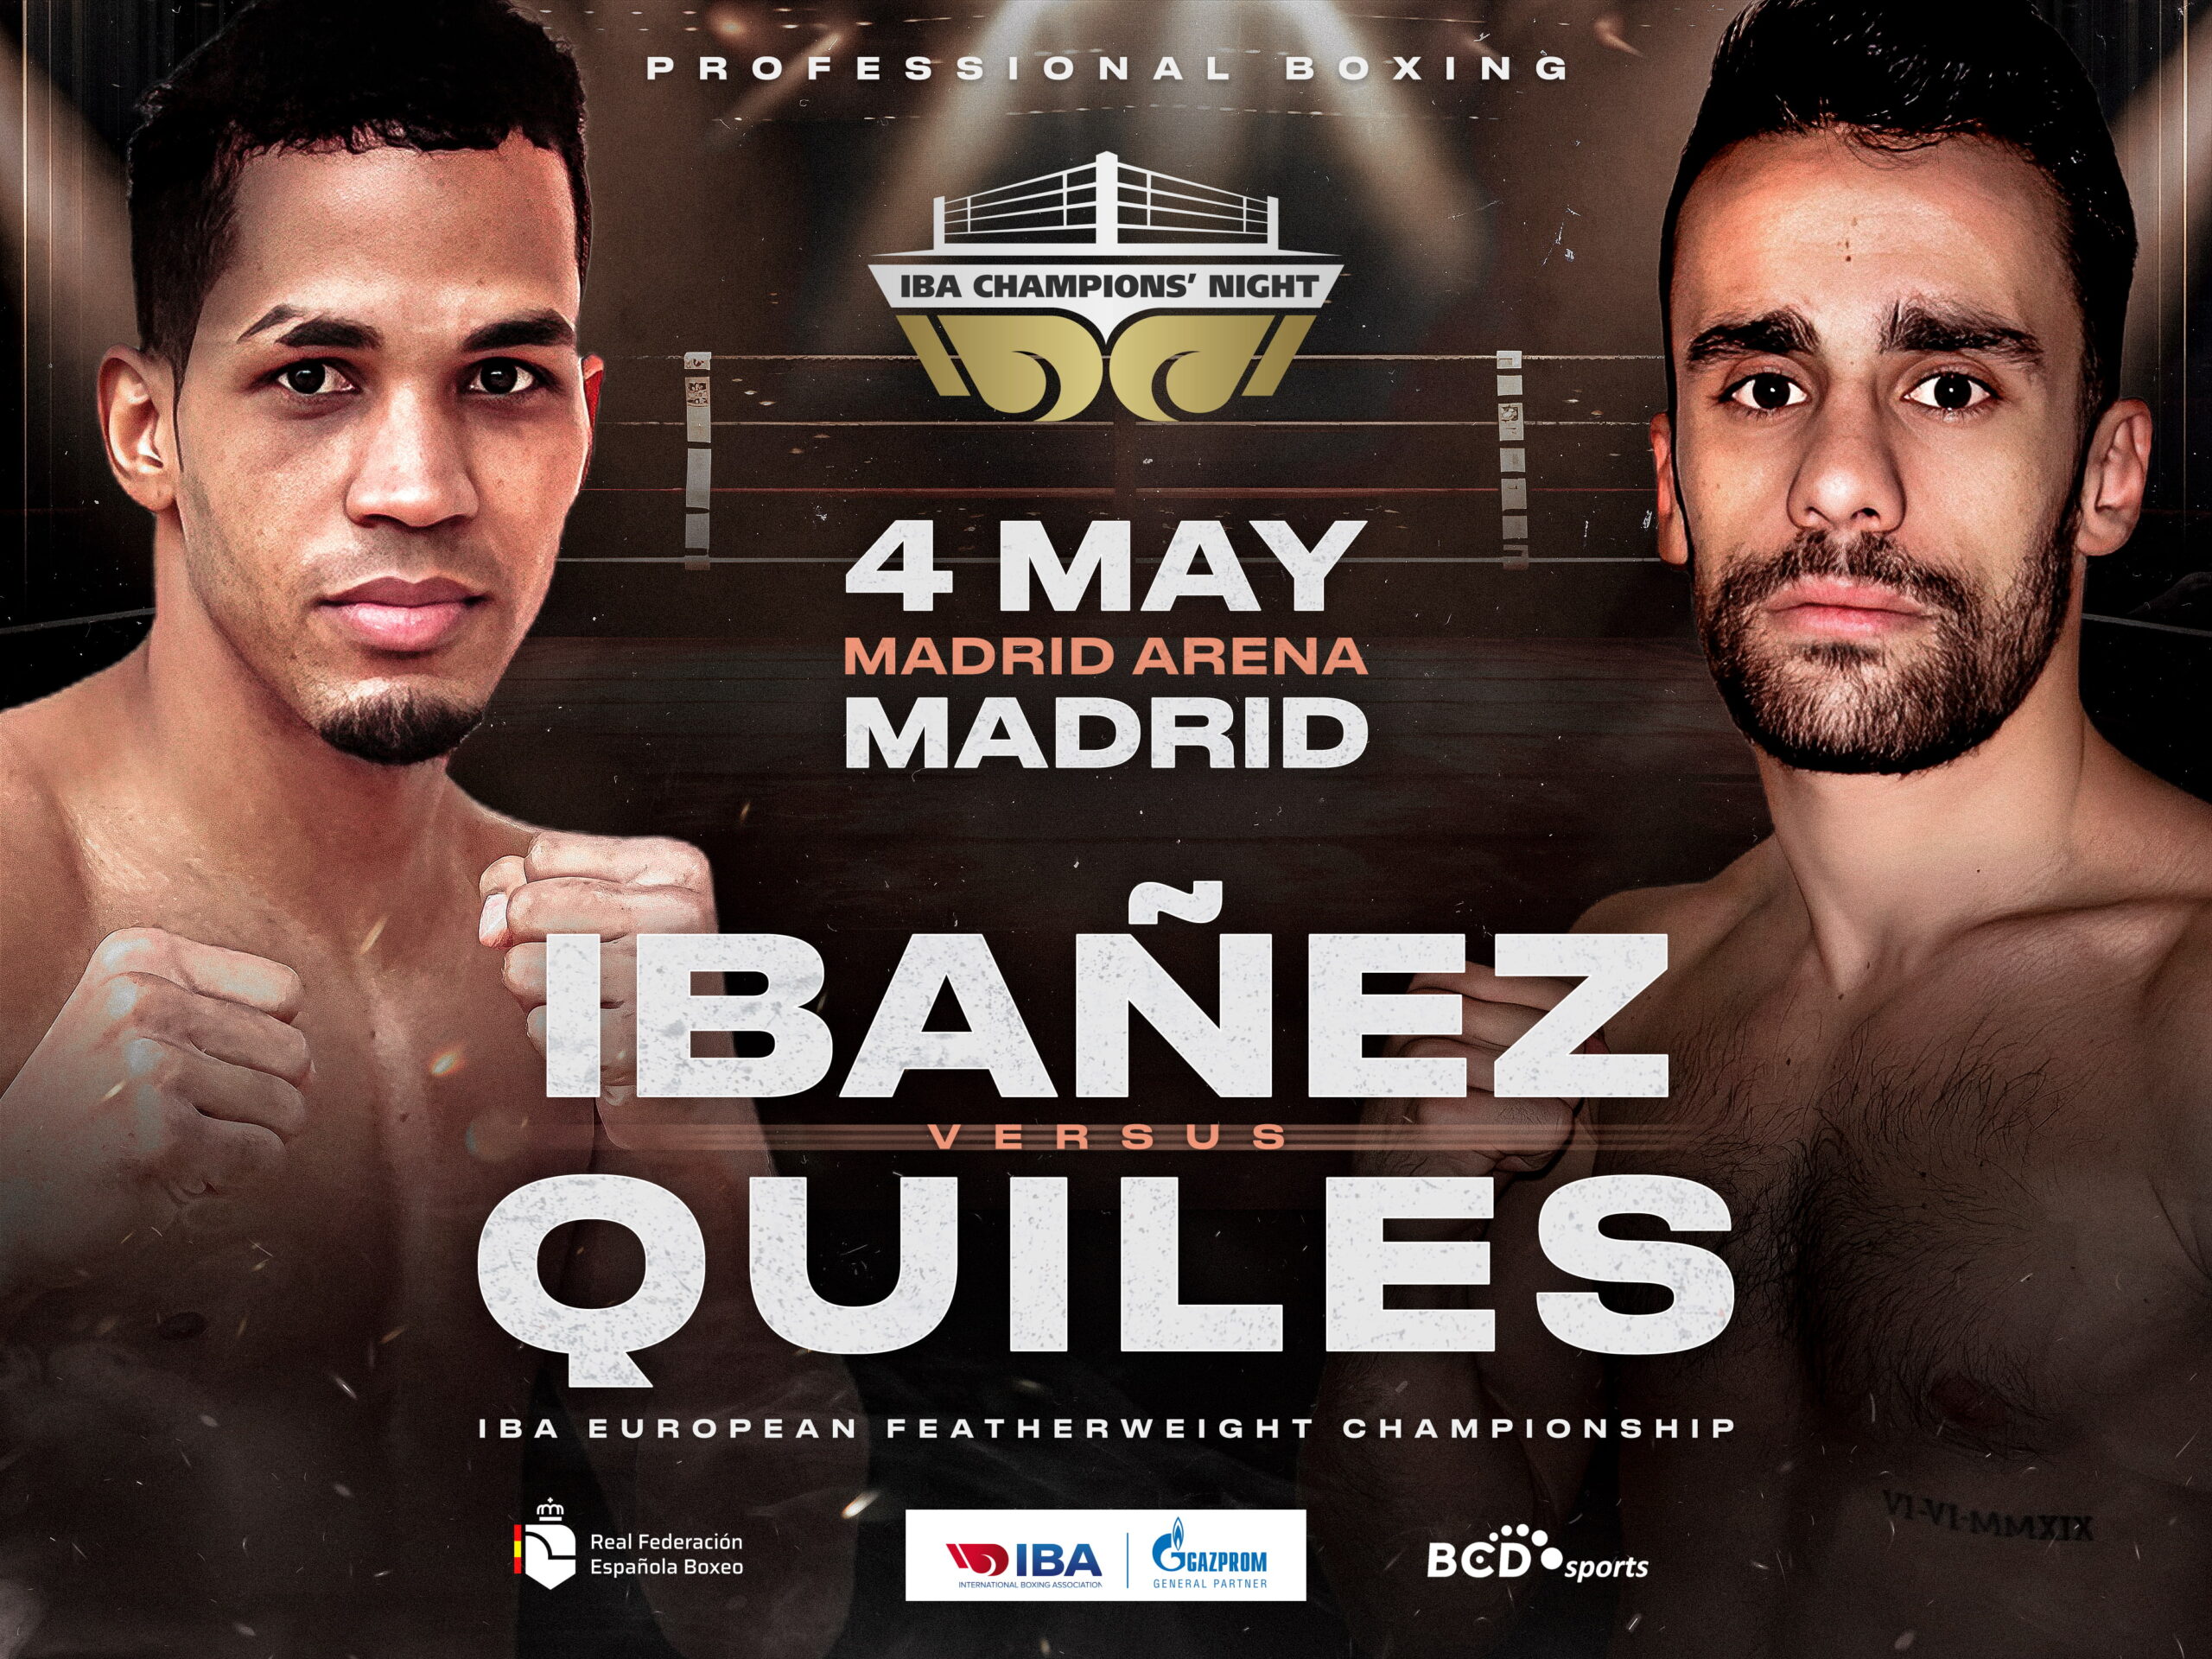 IBA Champions’ Night comes to Madrid for another European title belt at 57kg